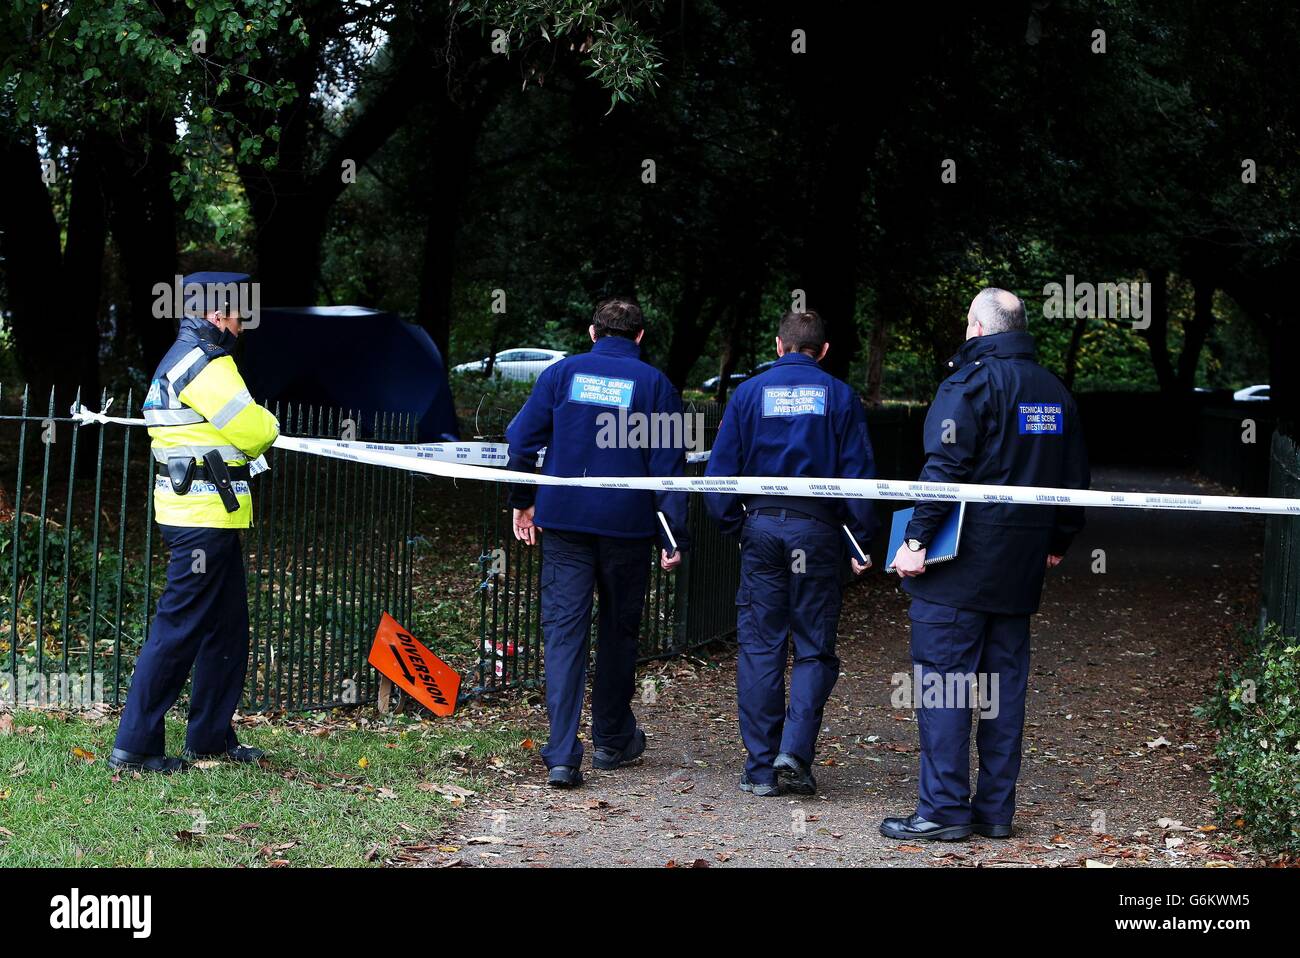 Members of the Technical Bureau Crime Scene Investigations unit at the scene in Phoenix Park in Dublin, where the body of a man has been found. Stock Photo